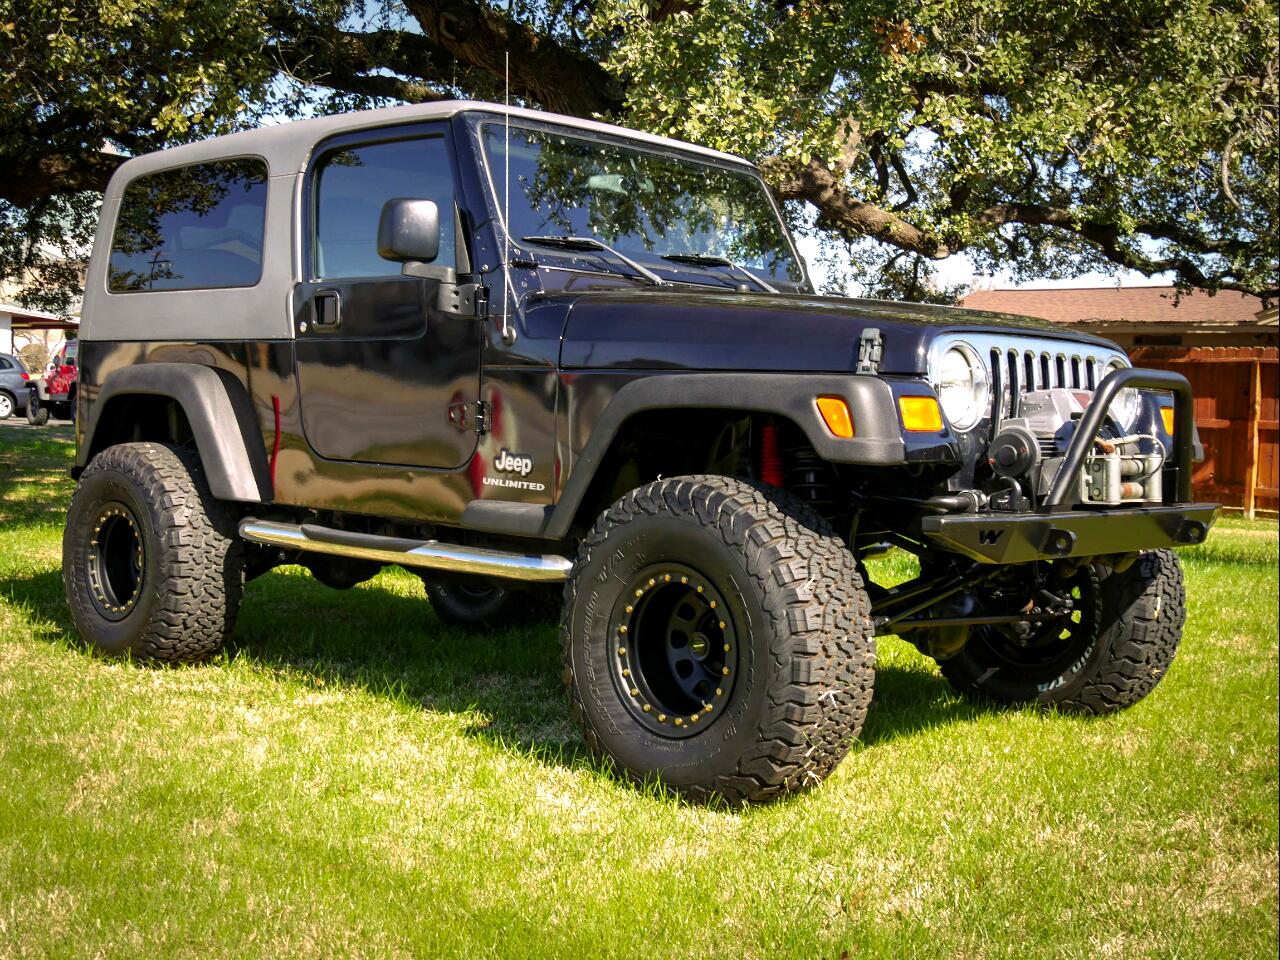 Used 2005 Jeep Wrangler Unlimited for Sale in Belton TX 76513 Big Tex  Autoplex